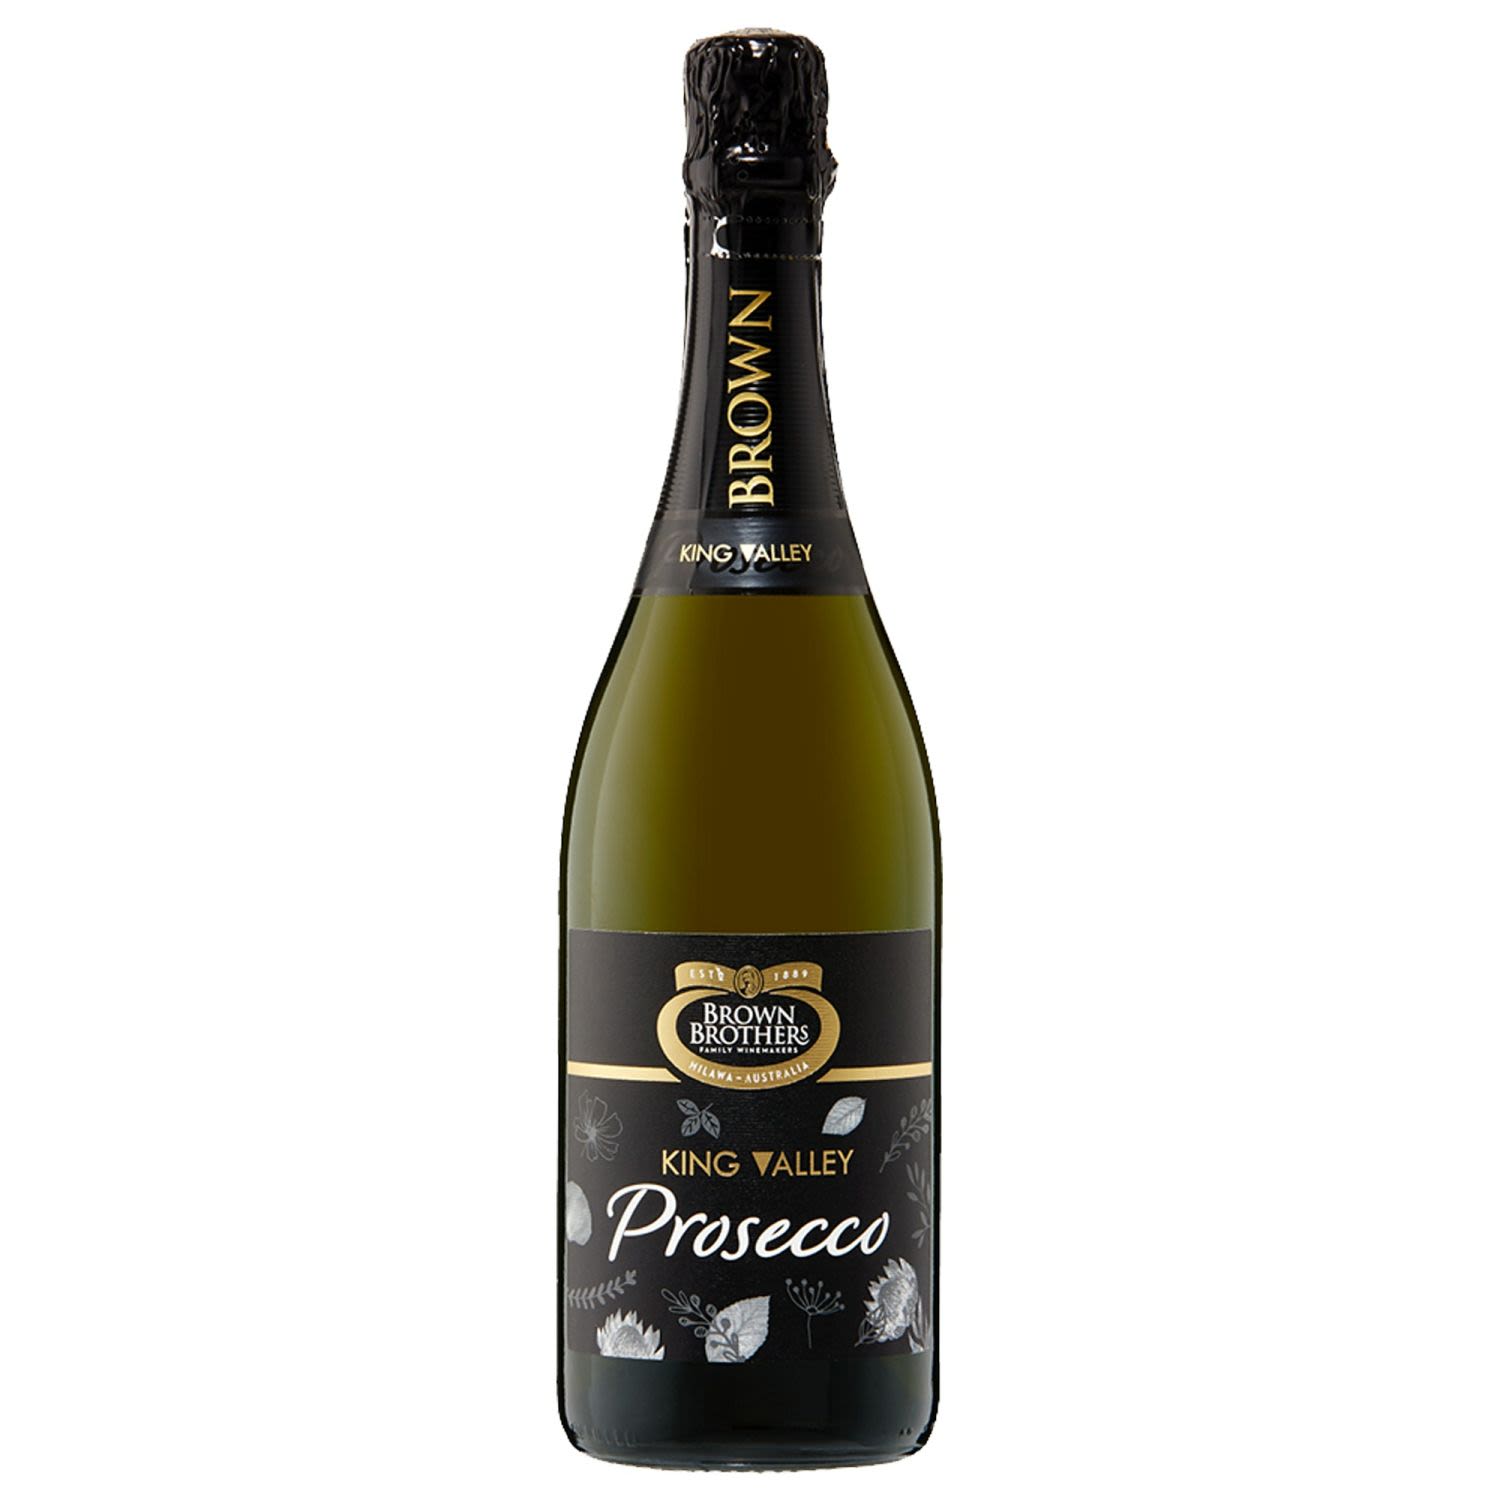 Brown Brothers Prosecco NV 750mL Bottle